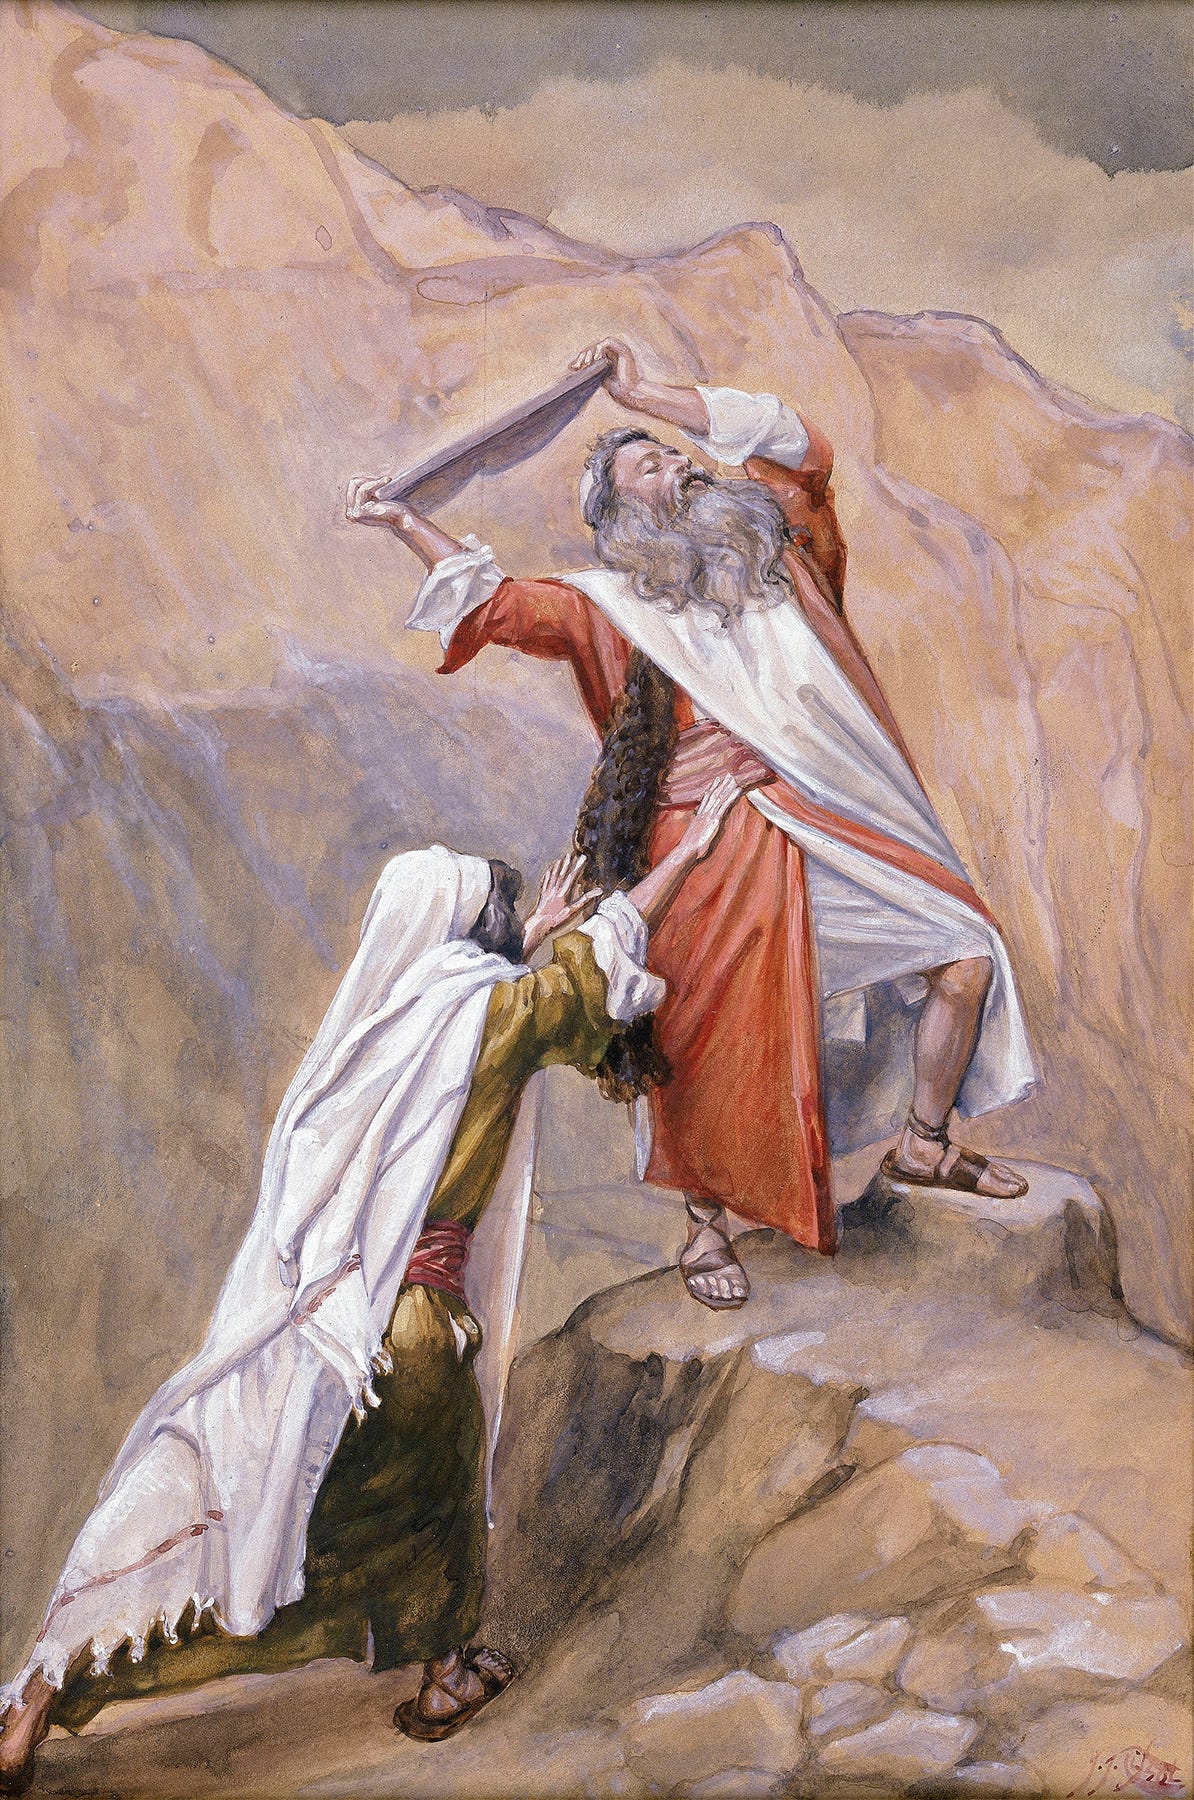 Moses Destroyeth the Tables of the Ten Commandments (c. 1896-1902) by James Tissot